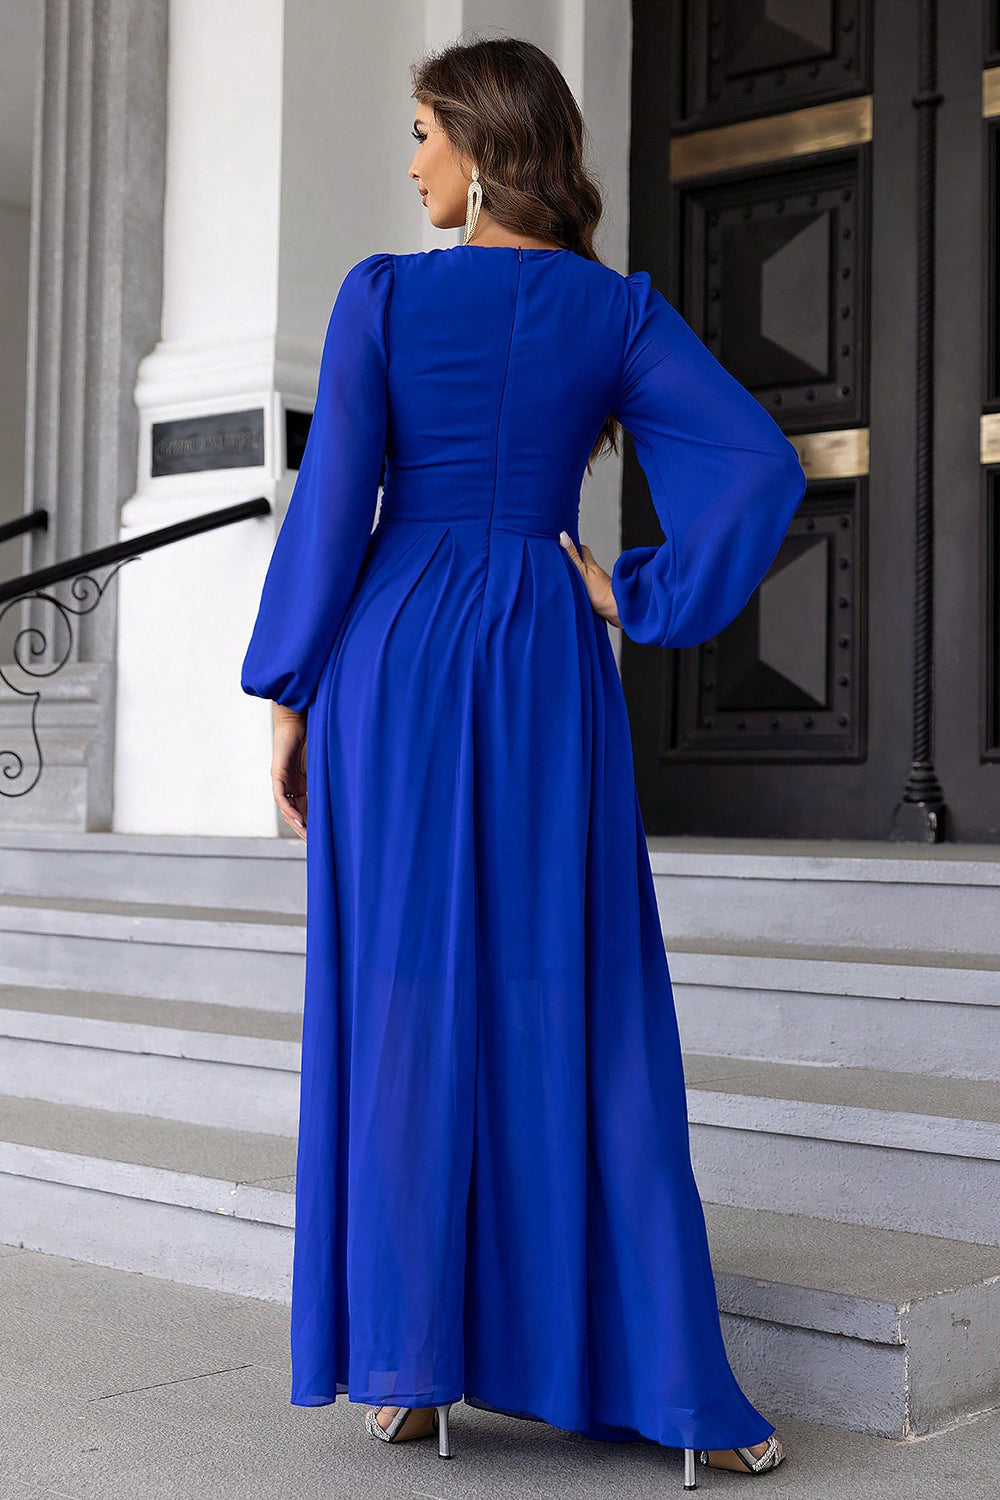 Elegant Long Sleeve Black Tie Wedding Guest Dress, Twist Front with Cutout Detail, Perfect for Summer Attire